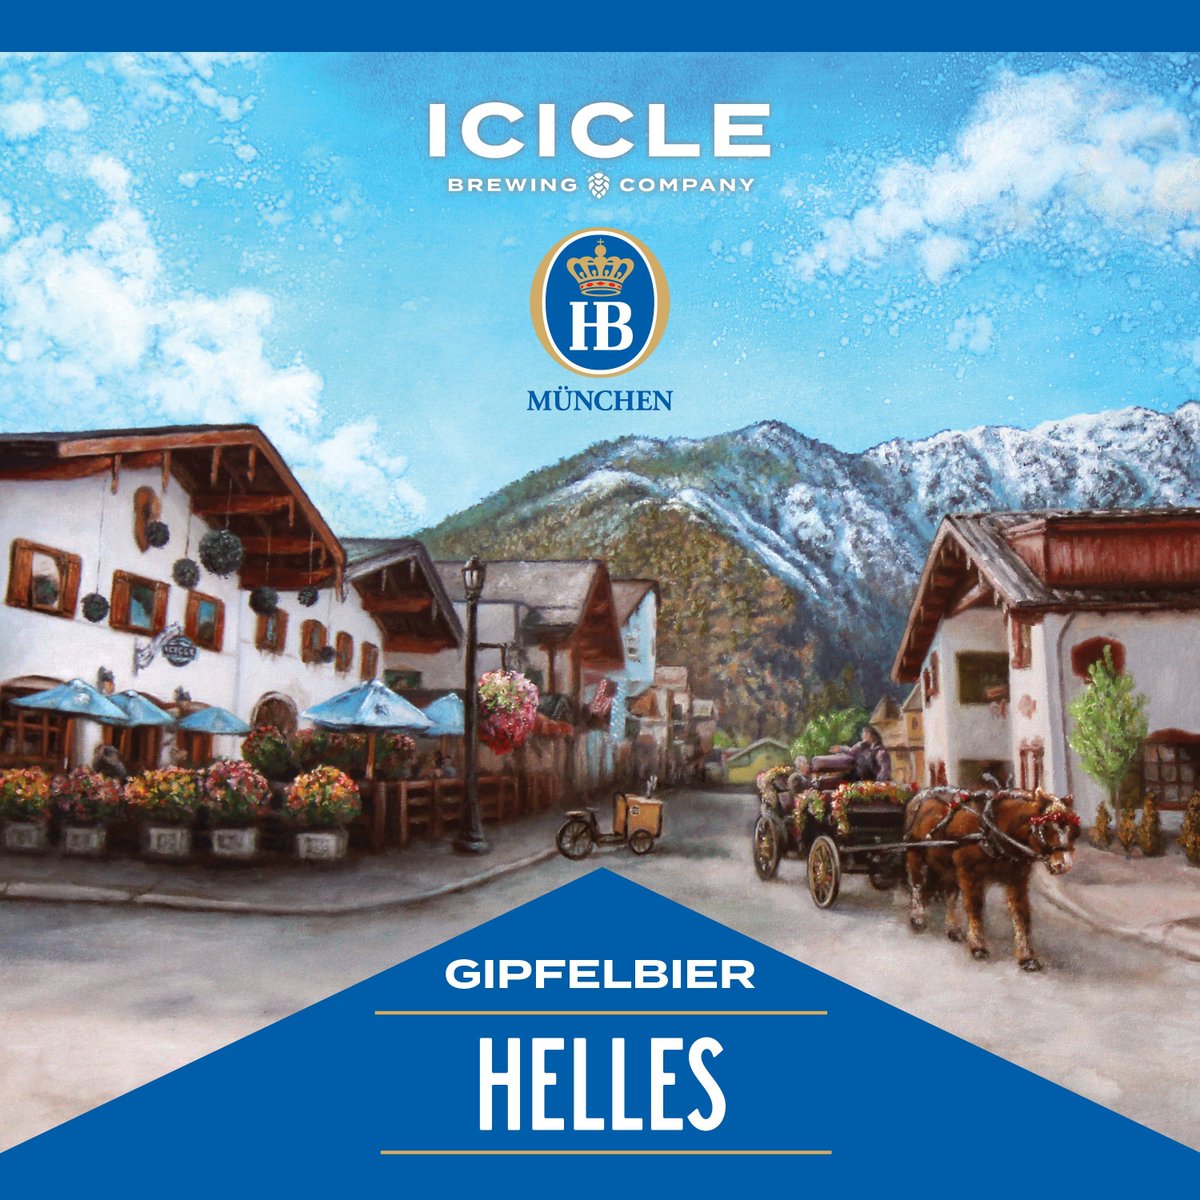 Announcing an exciting new collaboration beer release with @hofbrauusa next week: Gipfelbier Helles! We're throwing a big release party Thursday, May 9 at our taproom; tapping the first keg at 5pm! Alphorns, live music, stein holding, family friendly activities, and more!